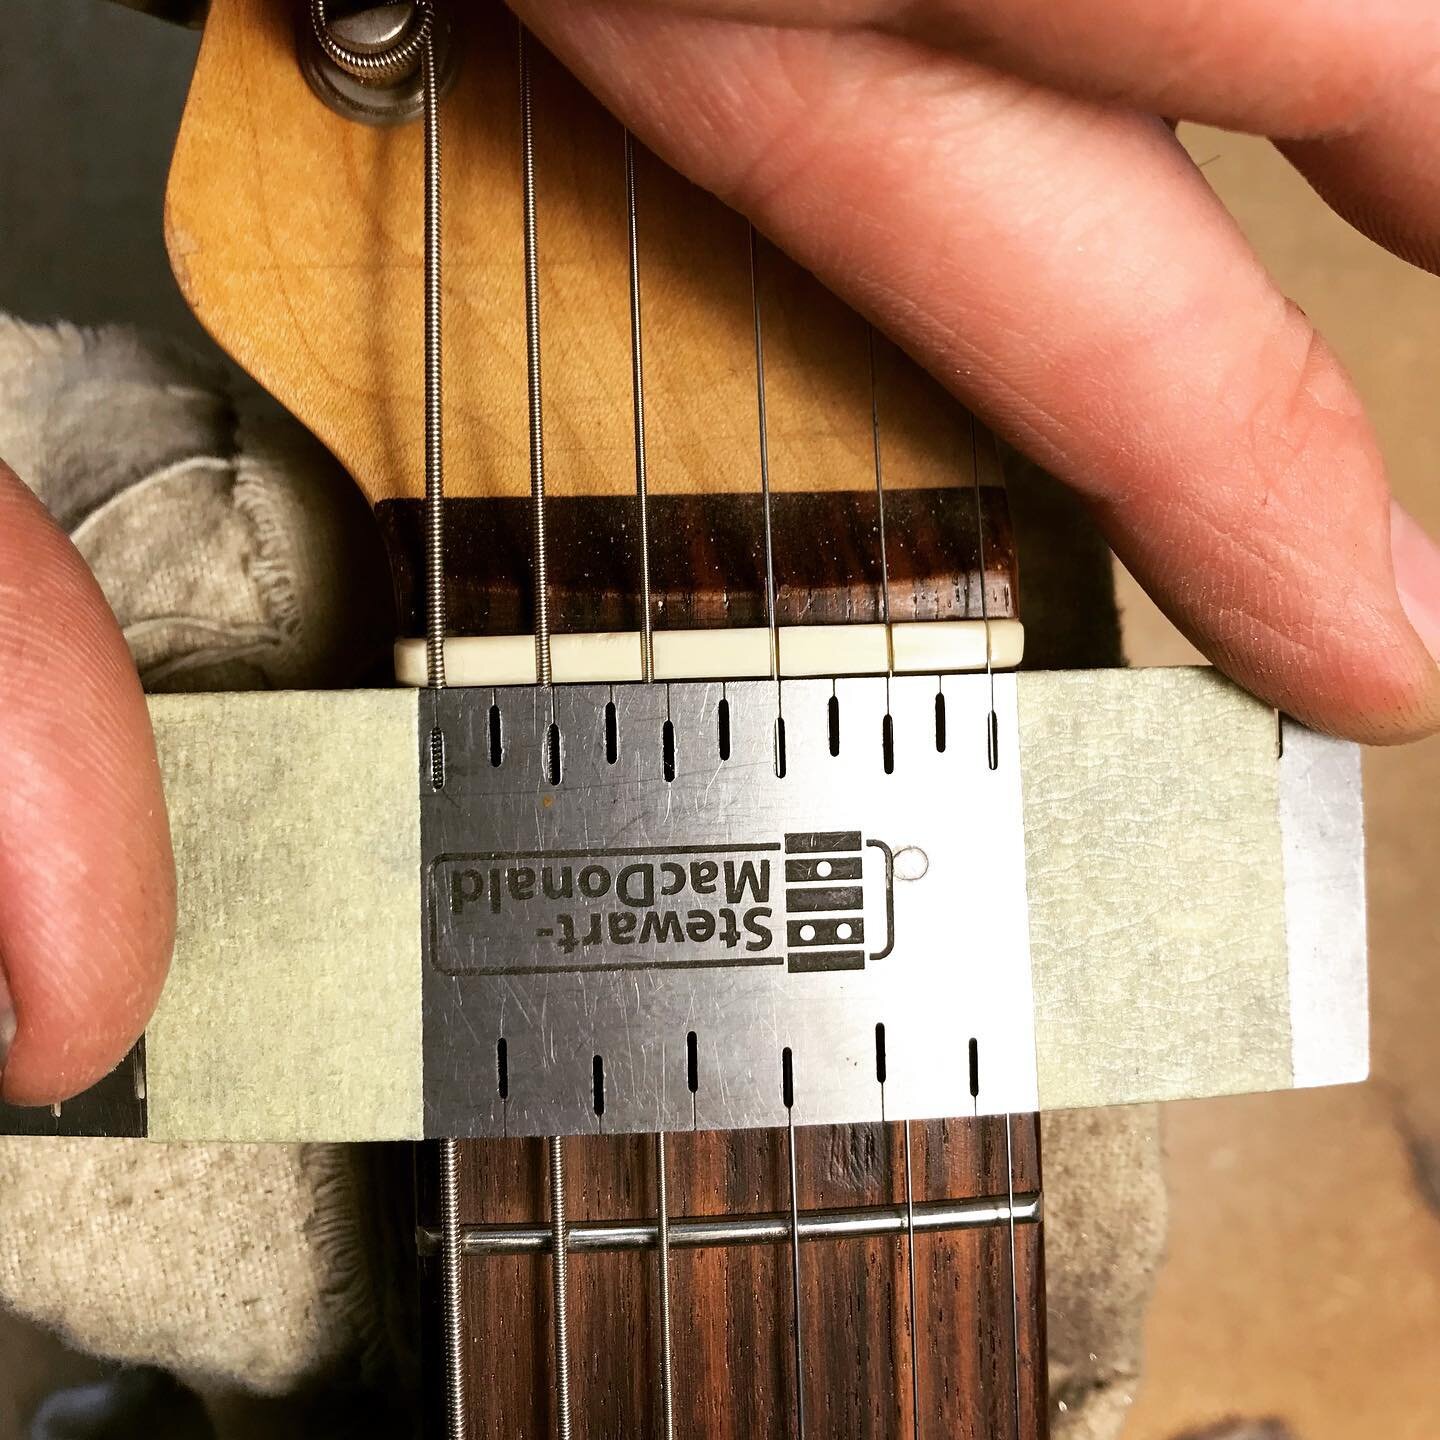 A before, during and after of the nut I made for a Telecaster. The string spacing was pretty far off, most noticeably on the fourth and fifth strings and so I wanted to make a new one. 

This string spacing ruler is so helpful. Marked some new lines,